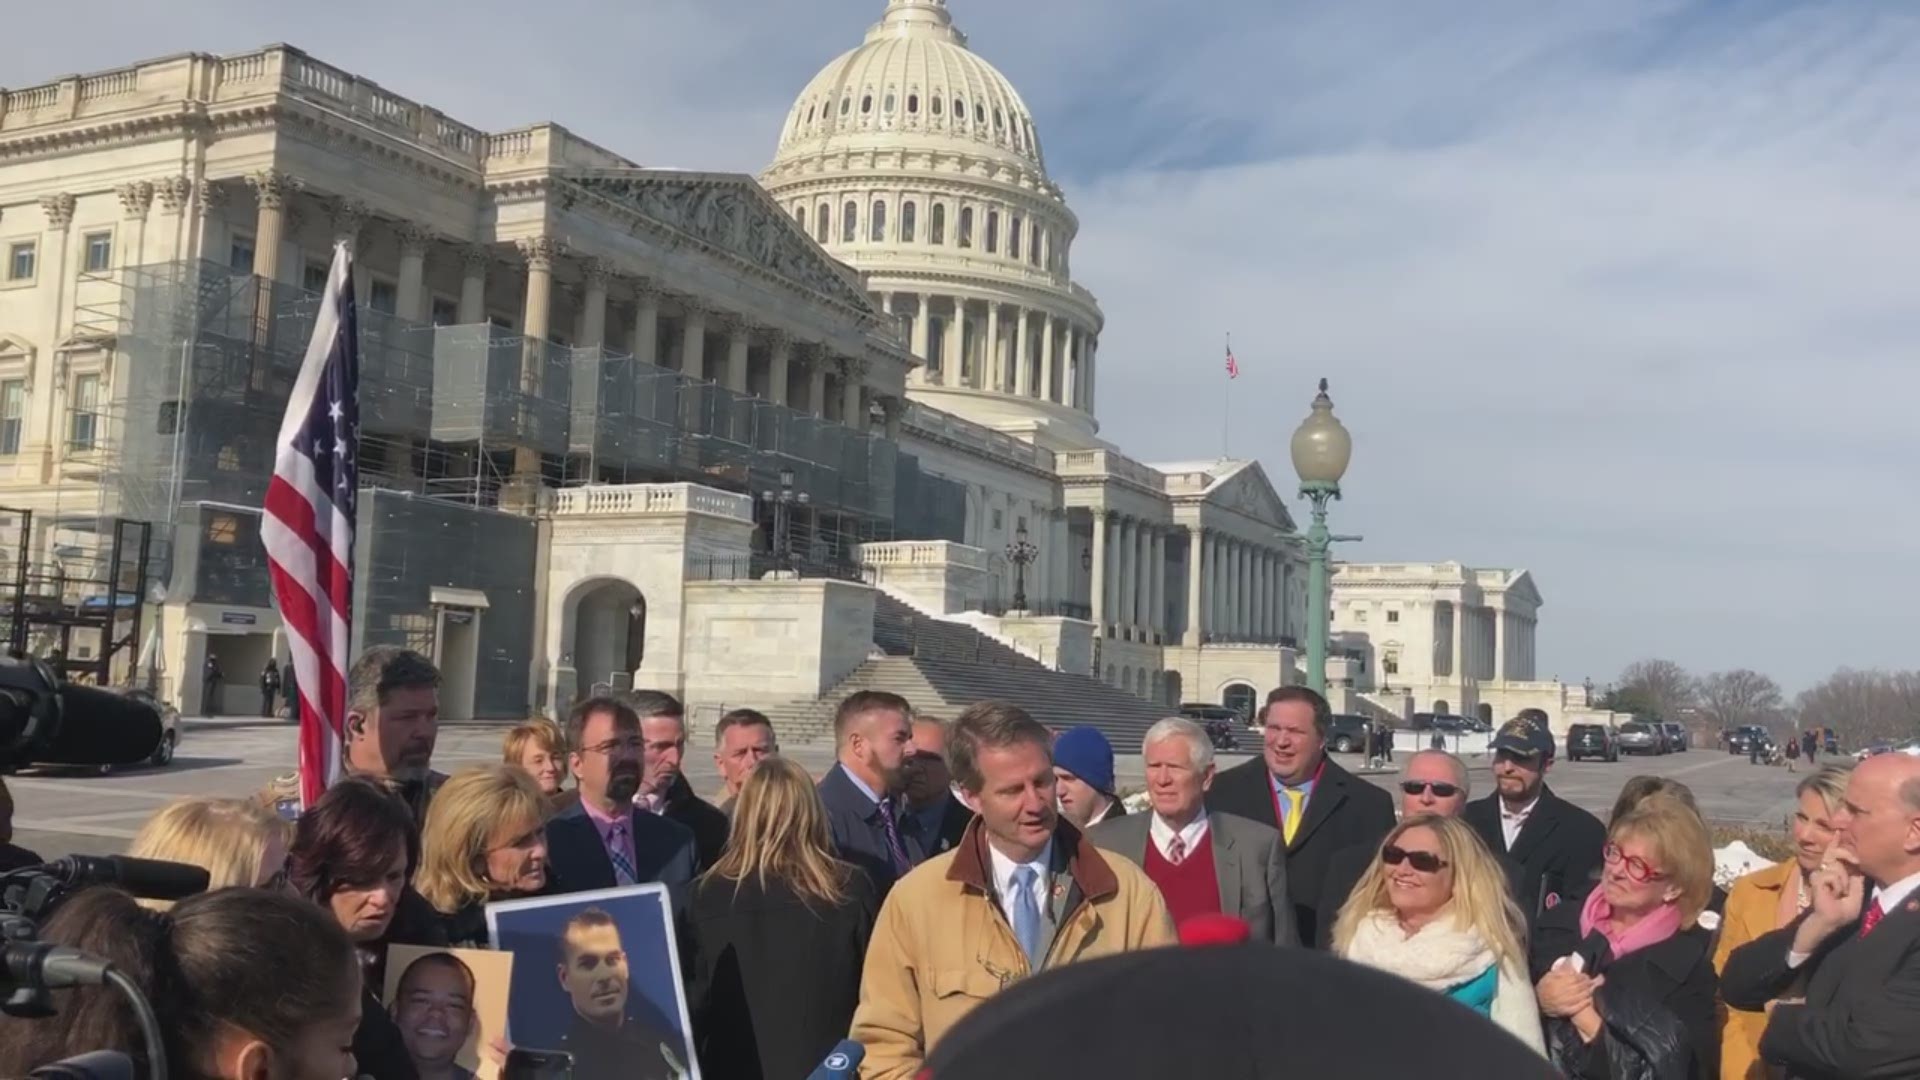 The Corcorans were in DC to voice their concerns for more border security. The Knoxville family is speaking out to honor the memory of Pierce Corcoran. The 22-year-old was killed on Chapman highway three weeks ago.